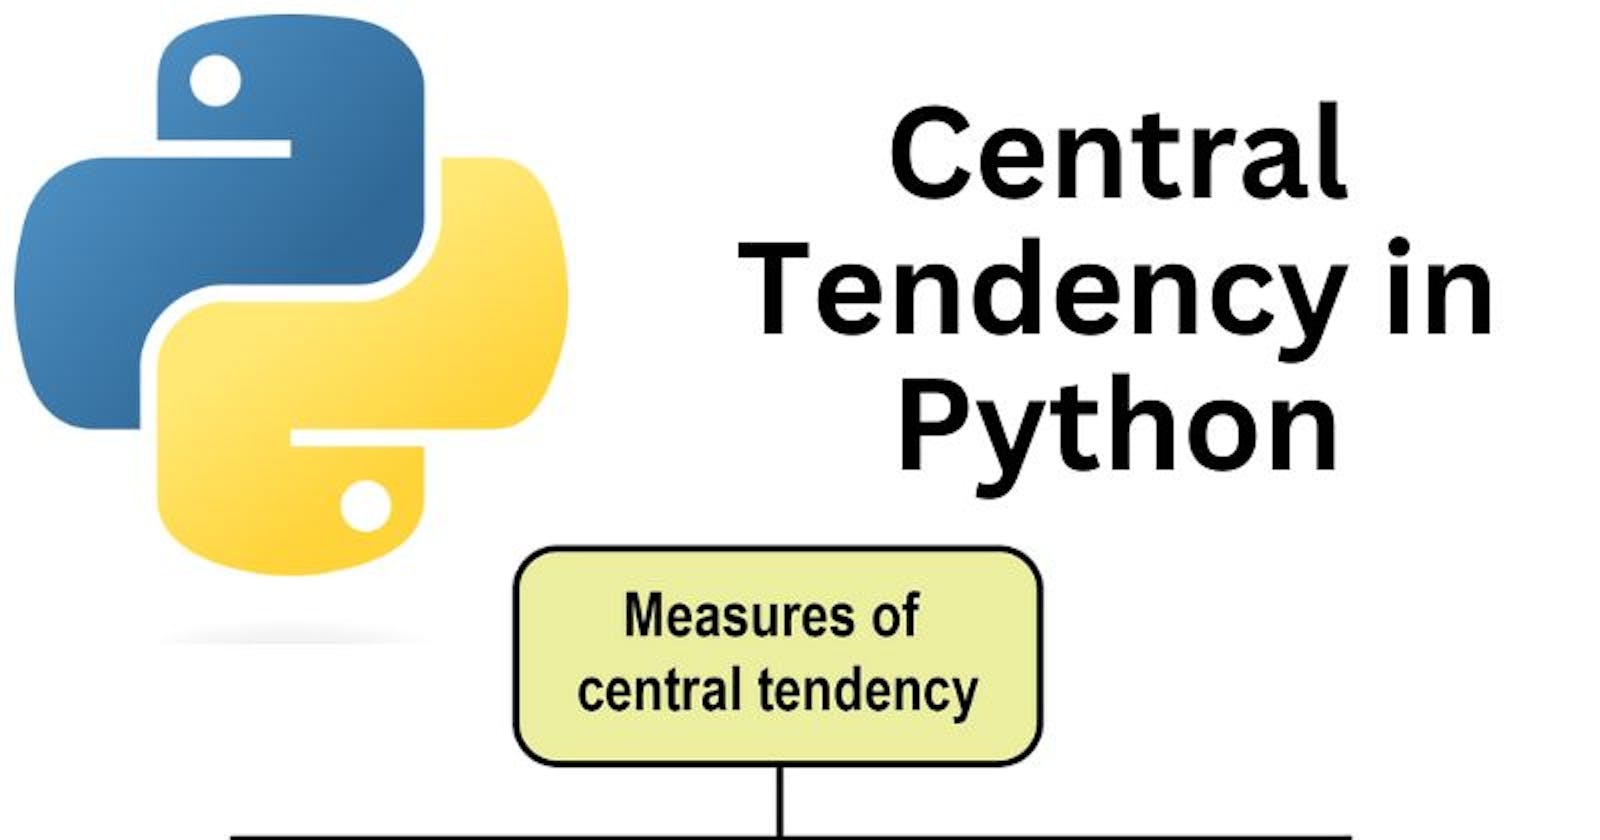 A Definitive Guide to Central Tendency in Python